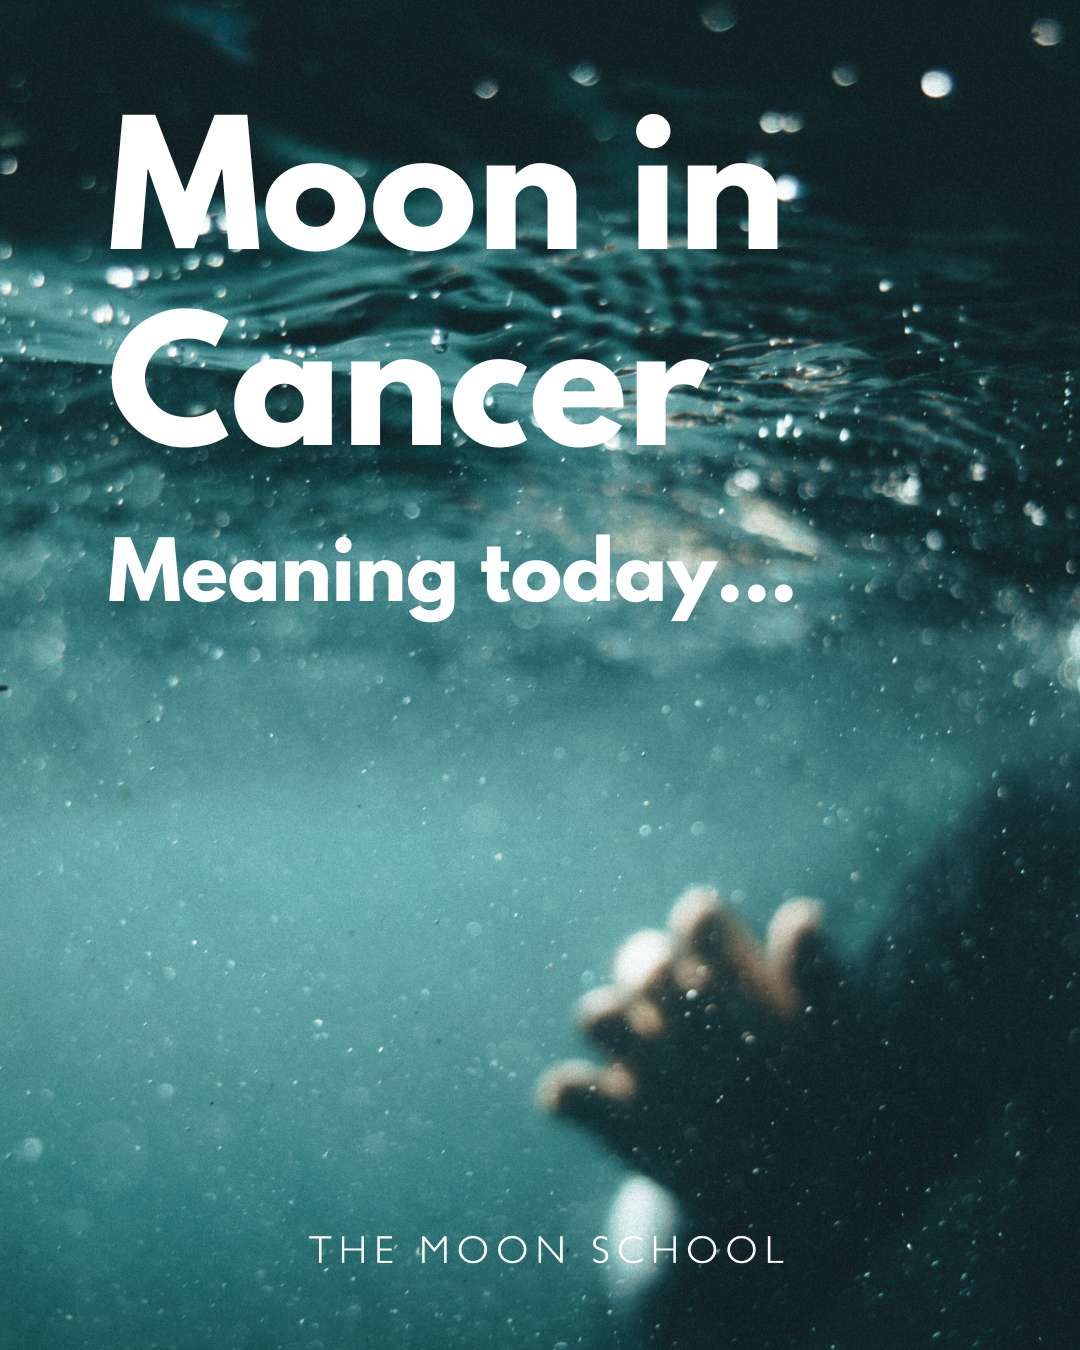 Underwater Moon in Cancer transit meaning